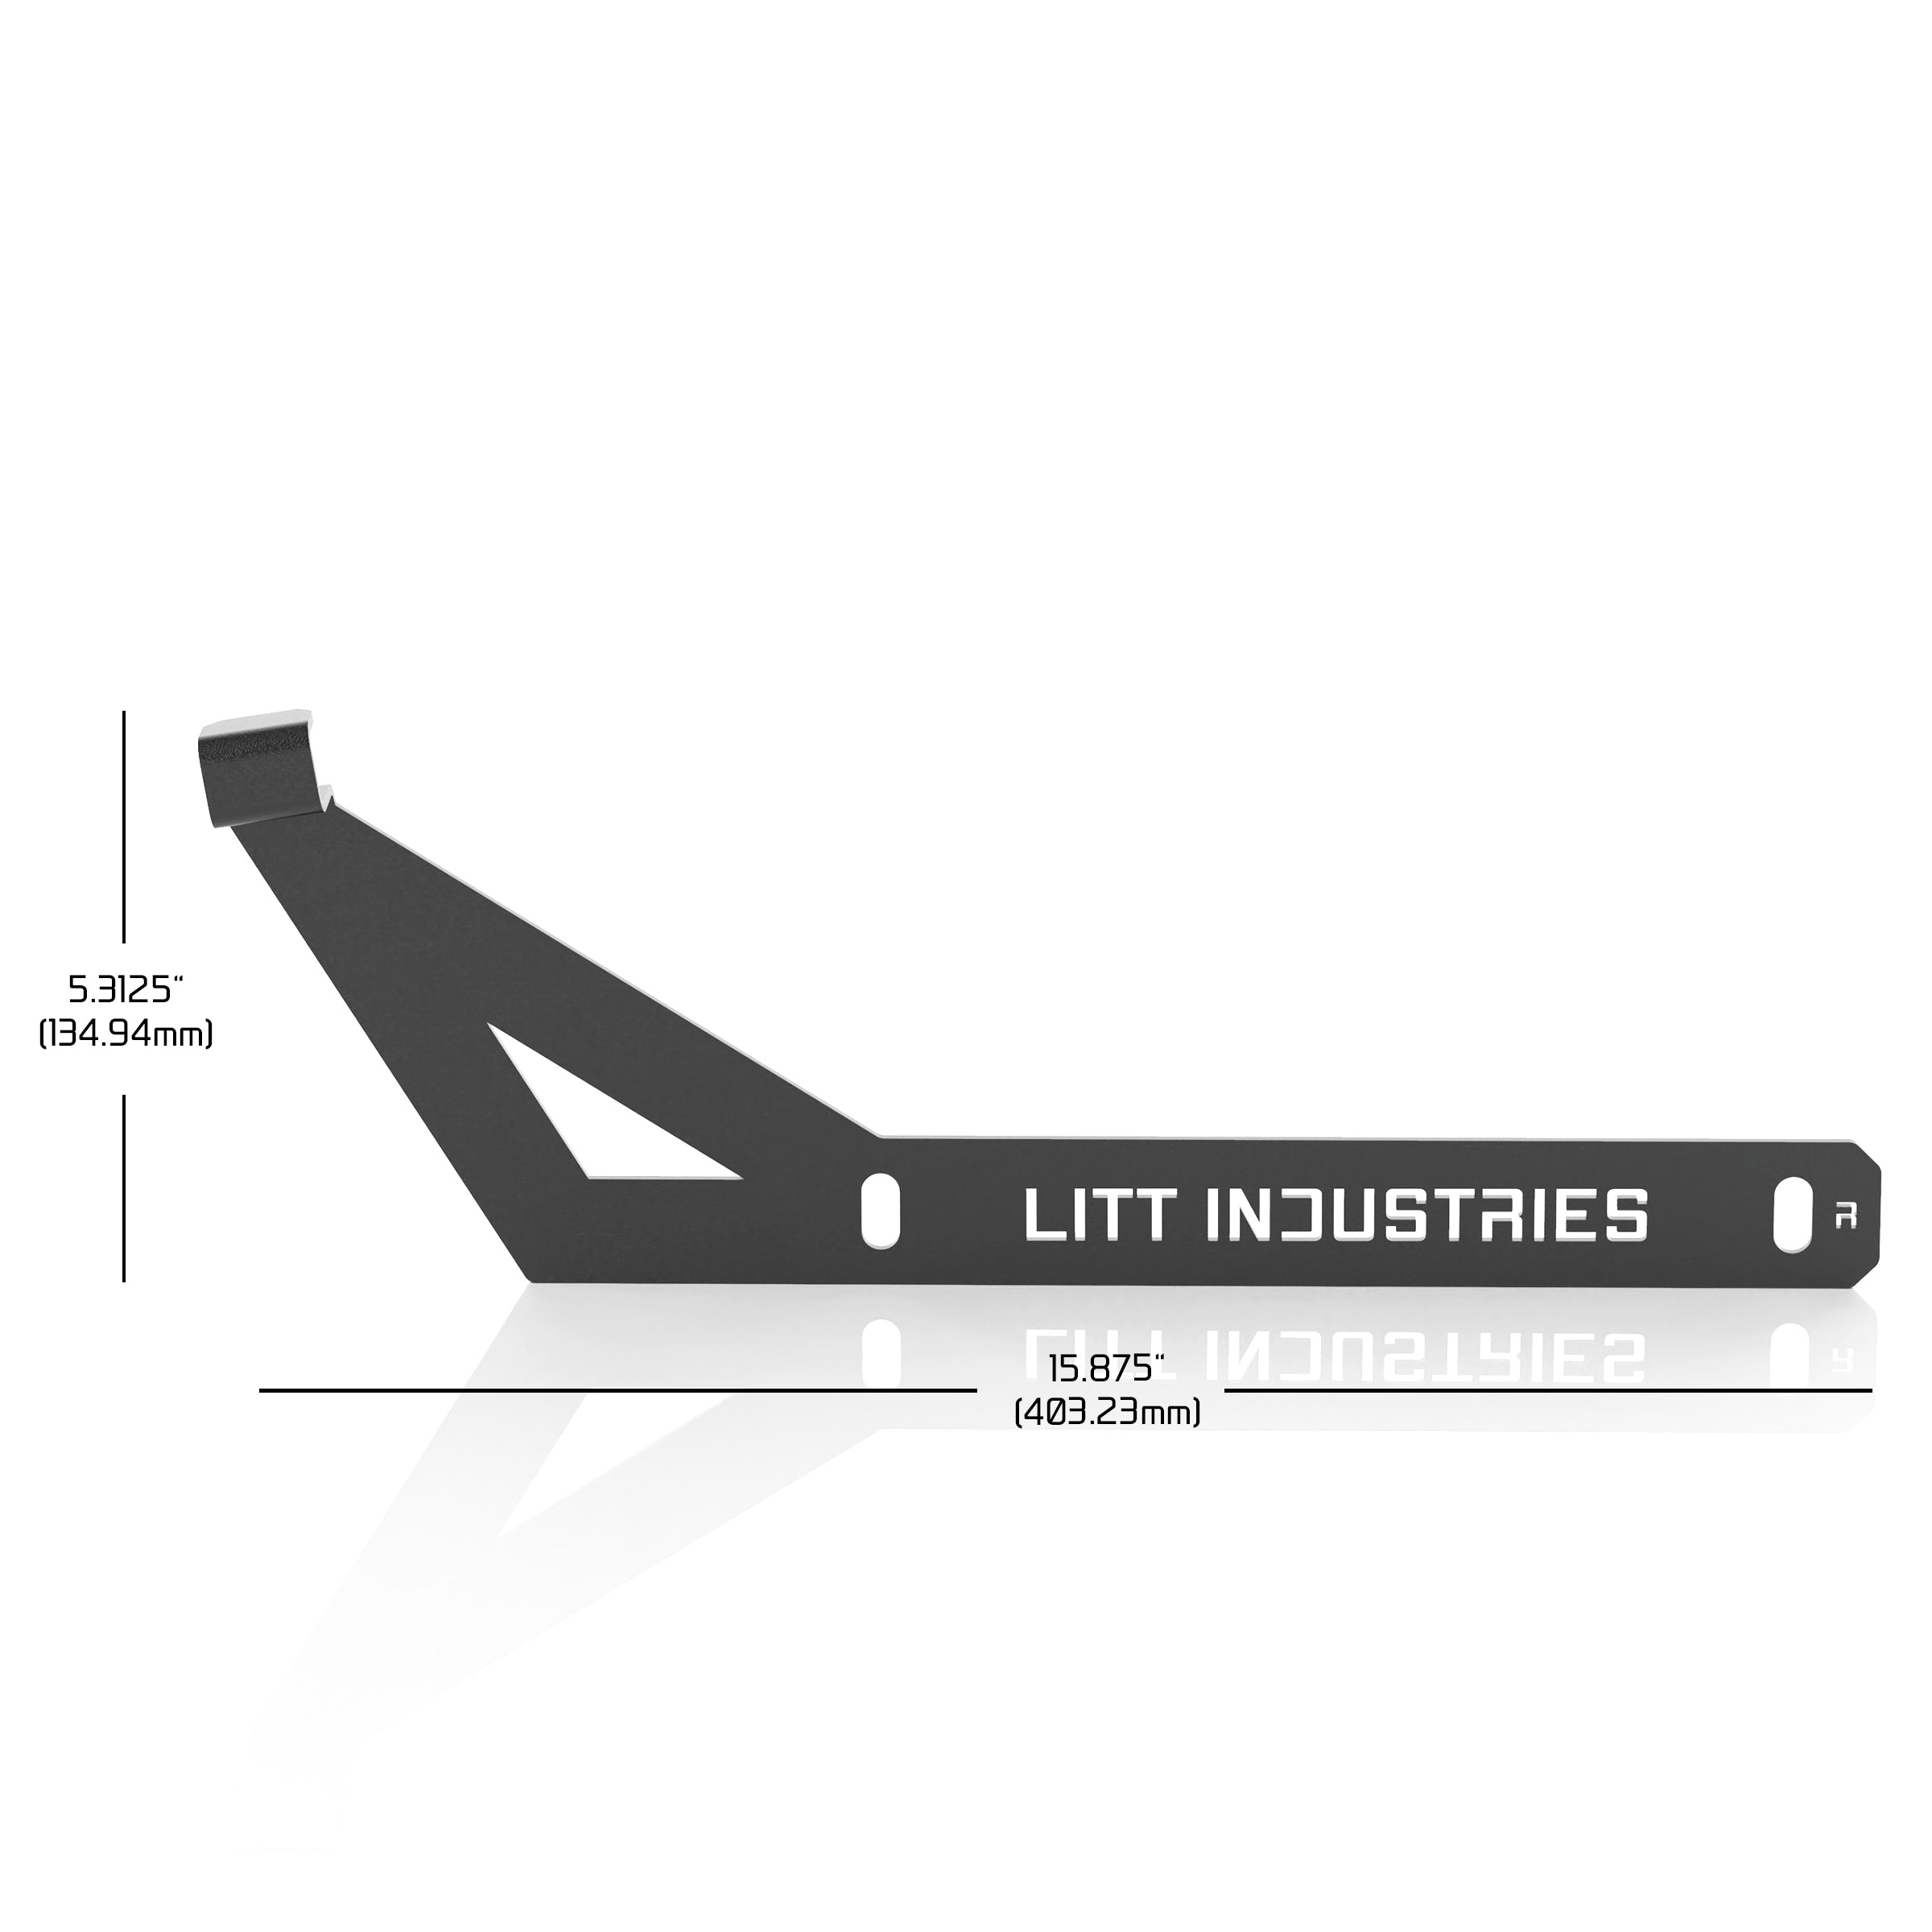 litt industries yeti 24 qt roadie cooler mounts dimensions for polaris rzr pro xp pro r or turbo r compatible with our toolbox mounts